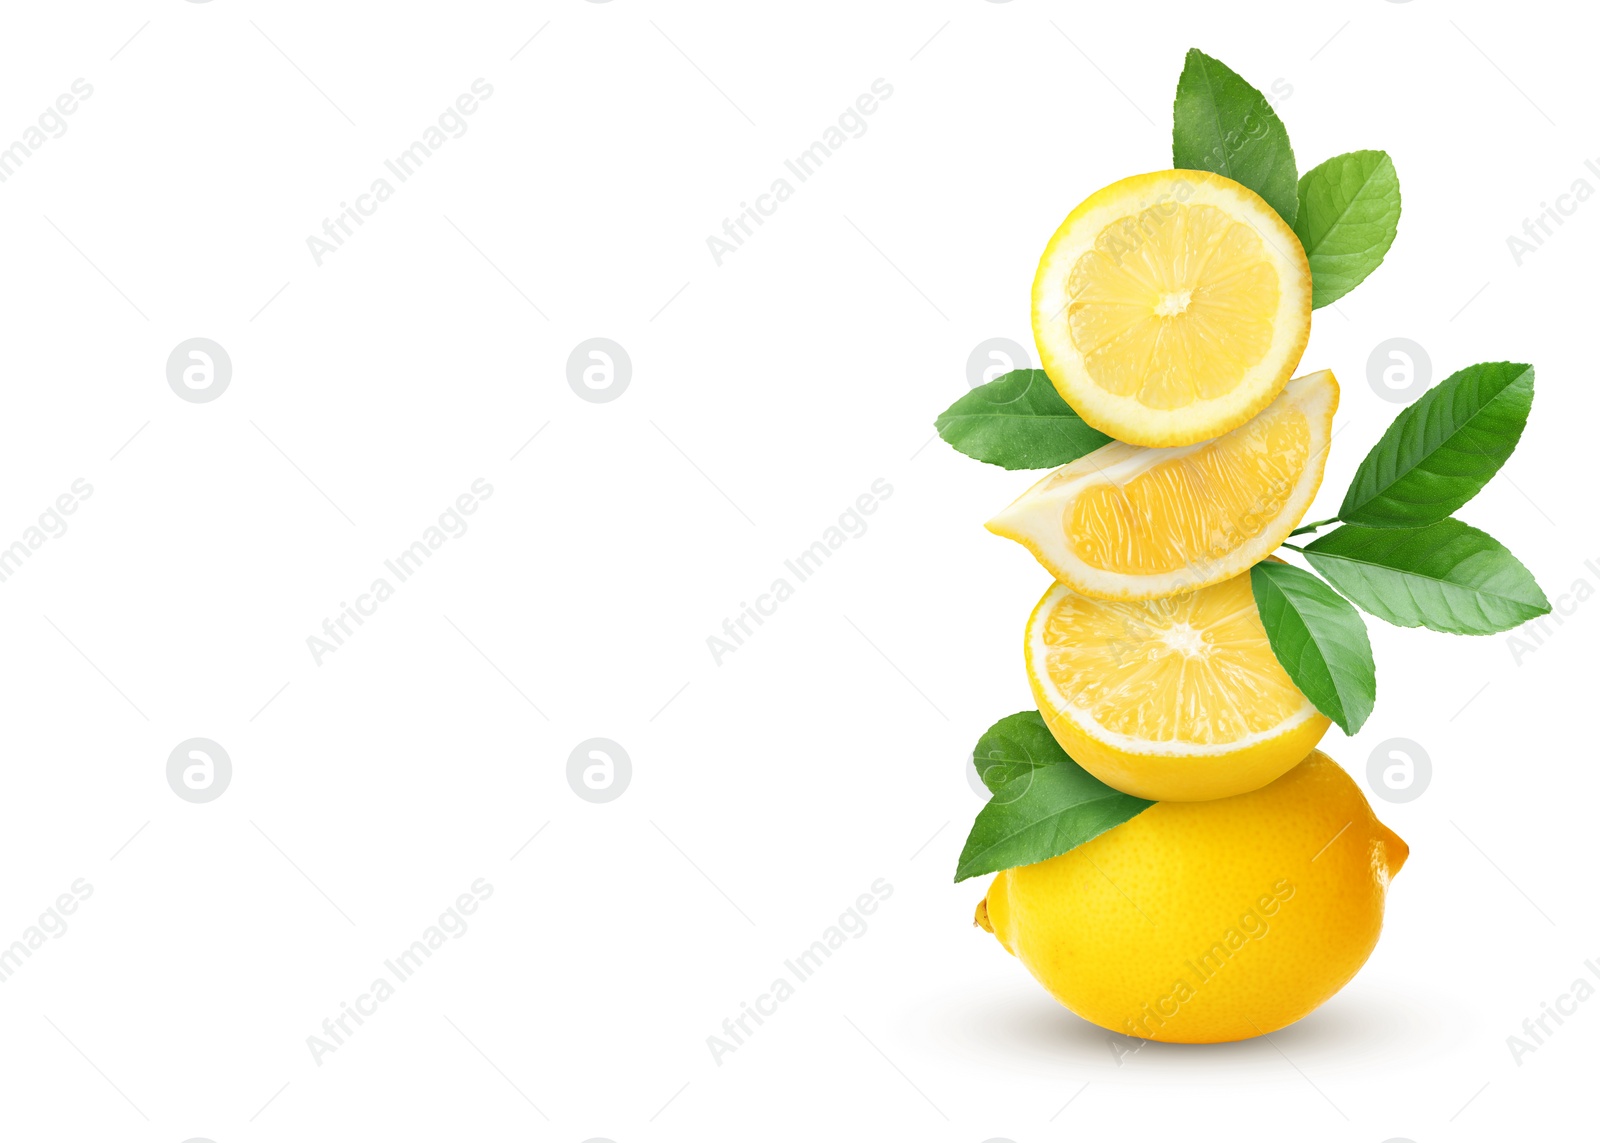 Image of Stacked cut and whole lemons with green leaves on white background